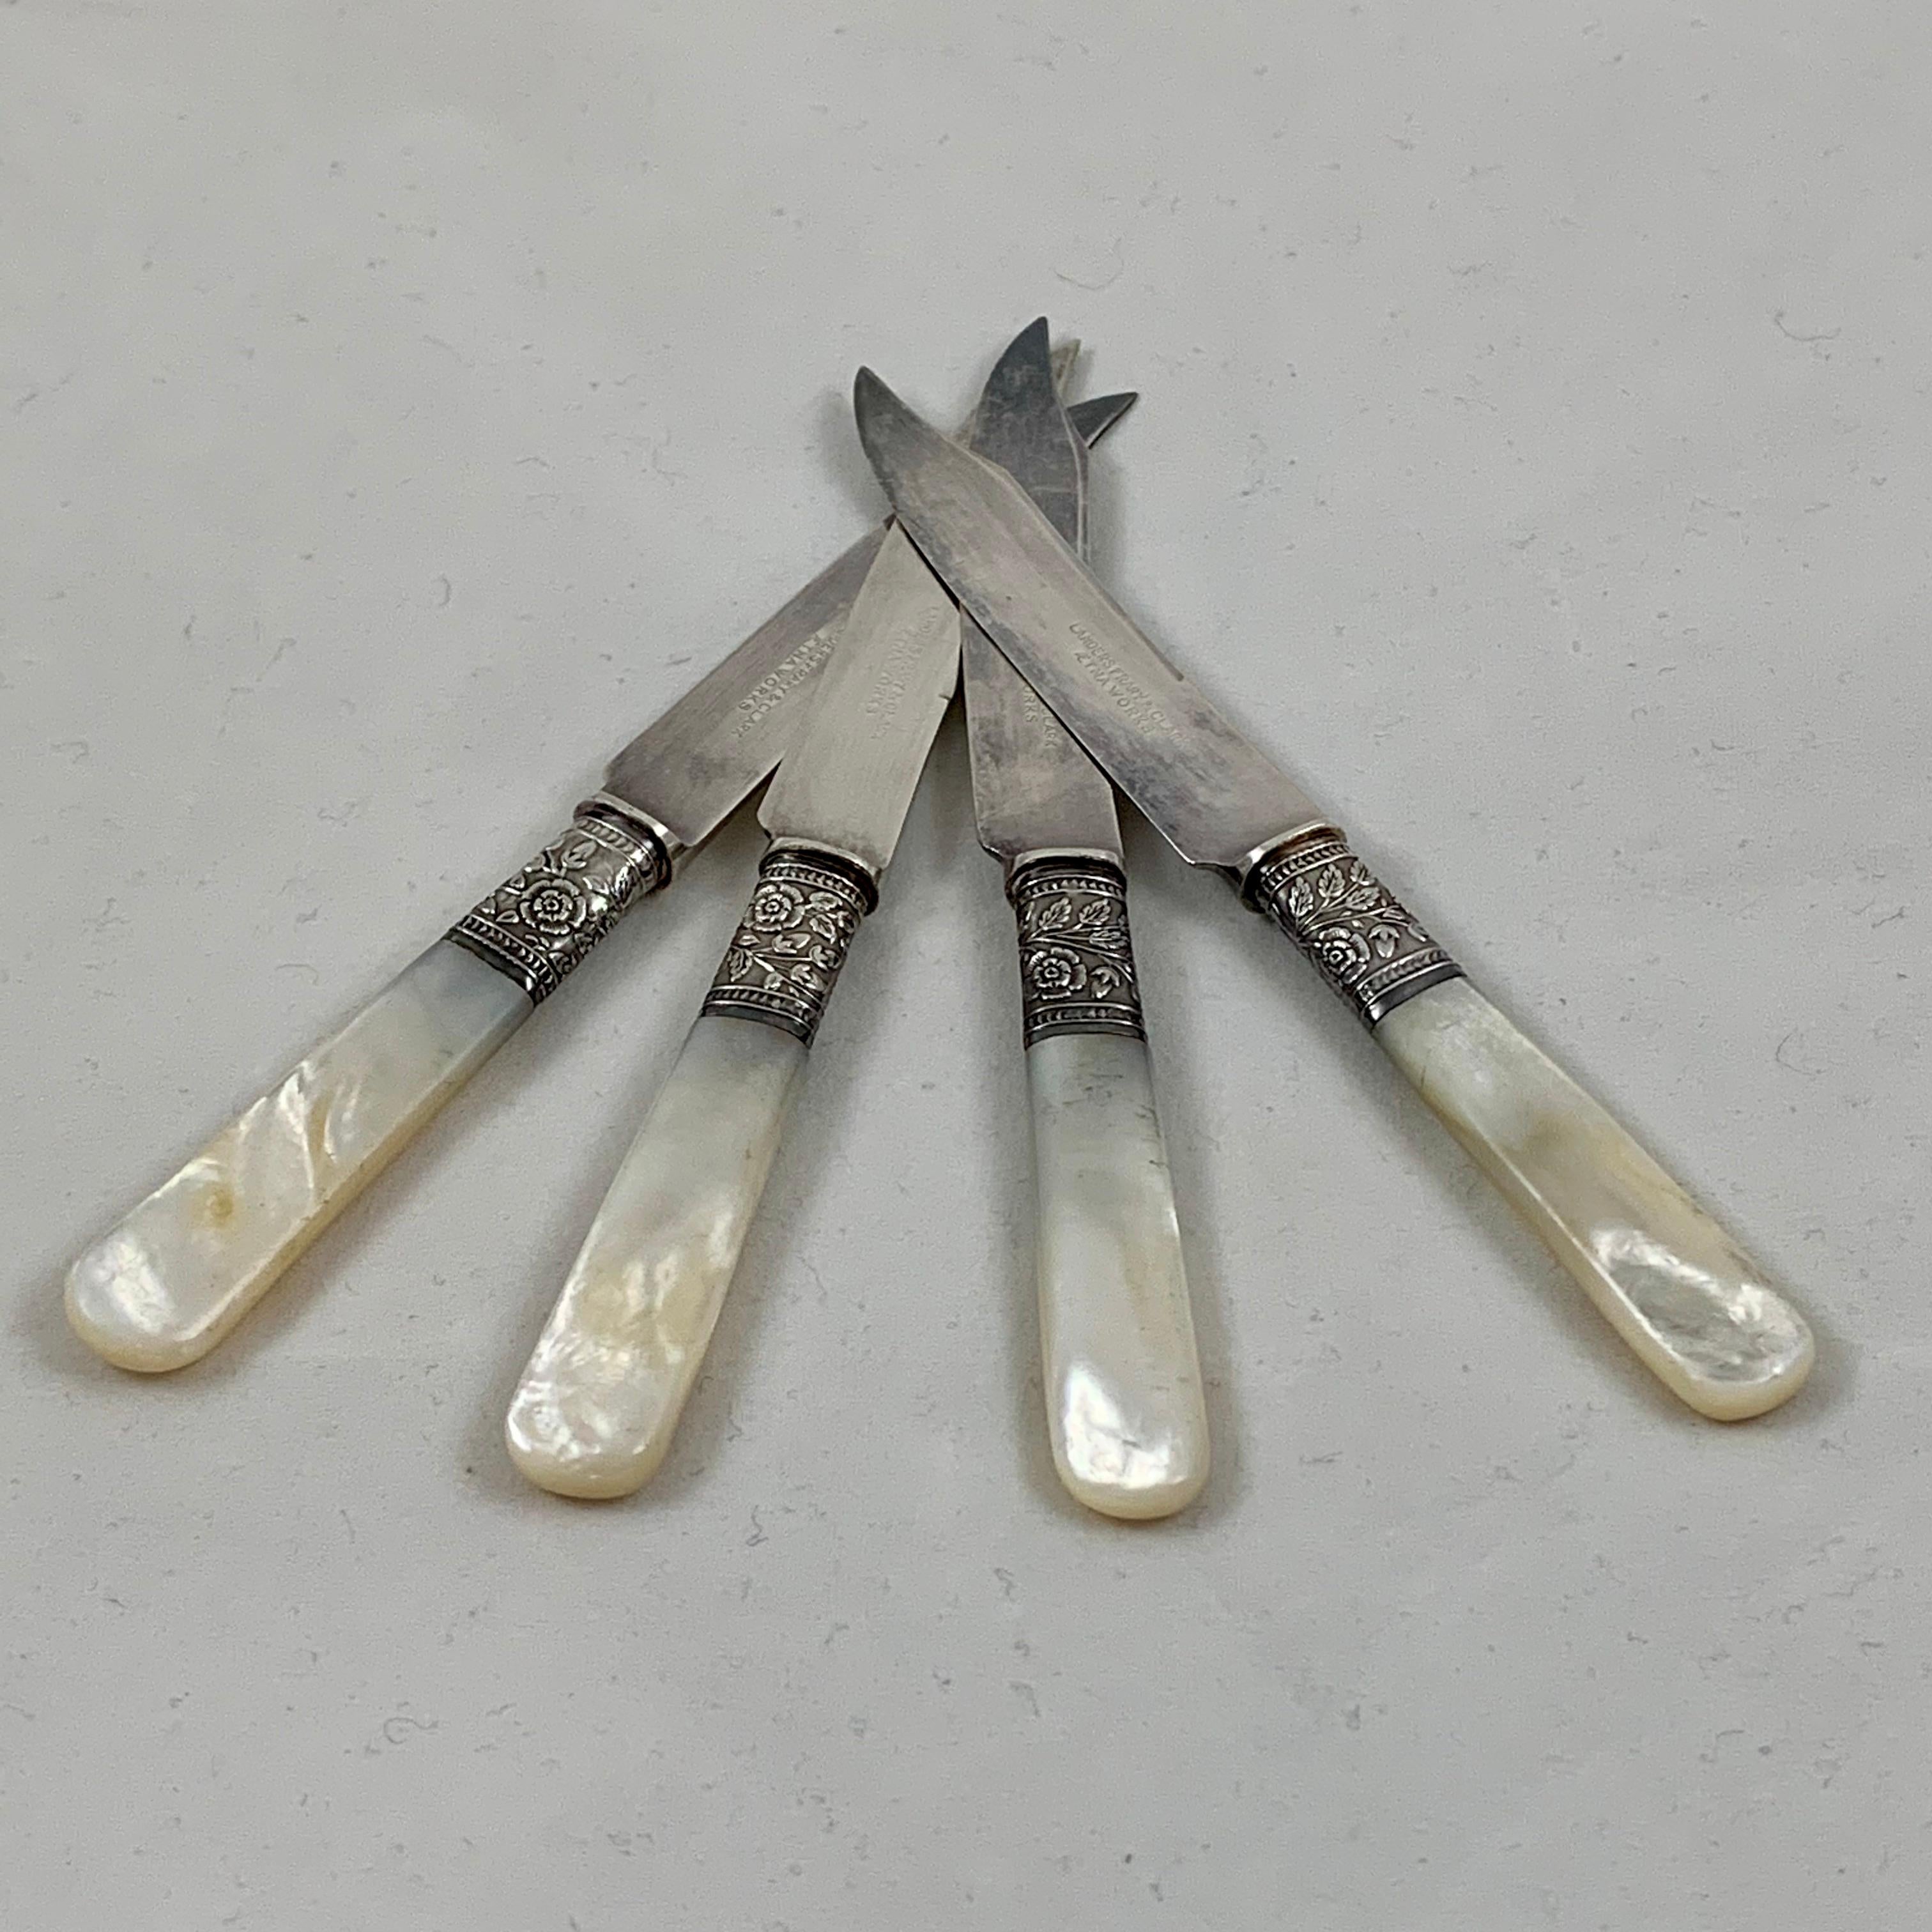 From Landers, Frary & Clark – Aetna Works, founded in New Britain, Connecticut, 1866, a set of four fruit and cheese knives. 

Mother of pearl handles are joined to plated blades by a sterling silver ferrule. The collar shows an intricate floral